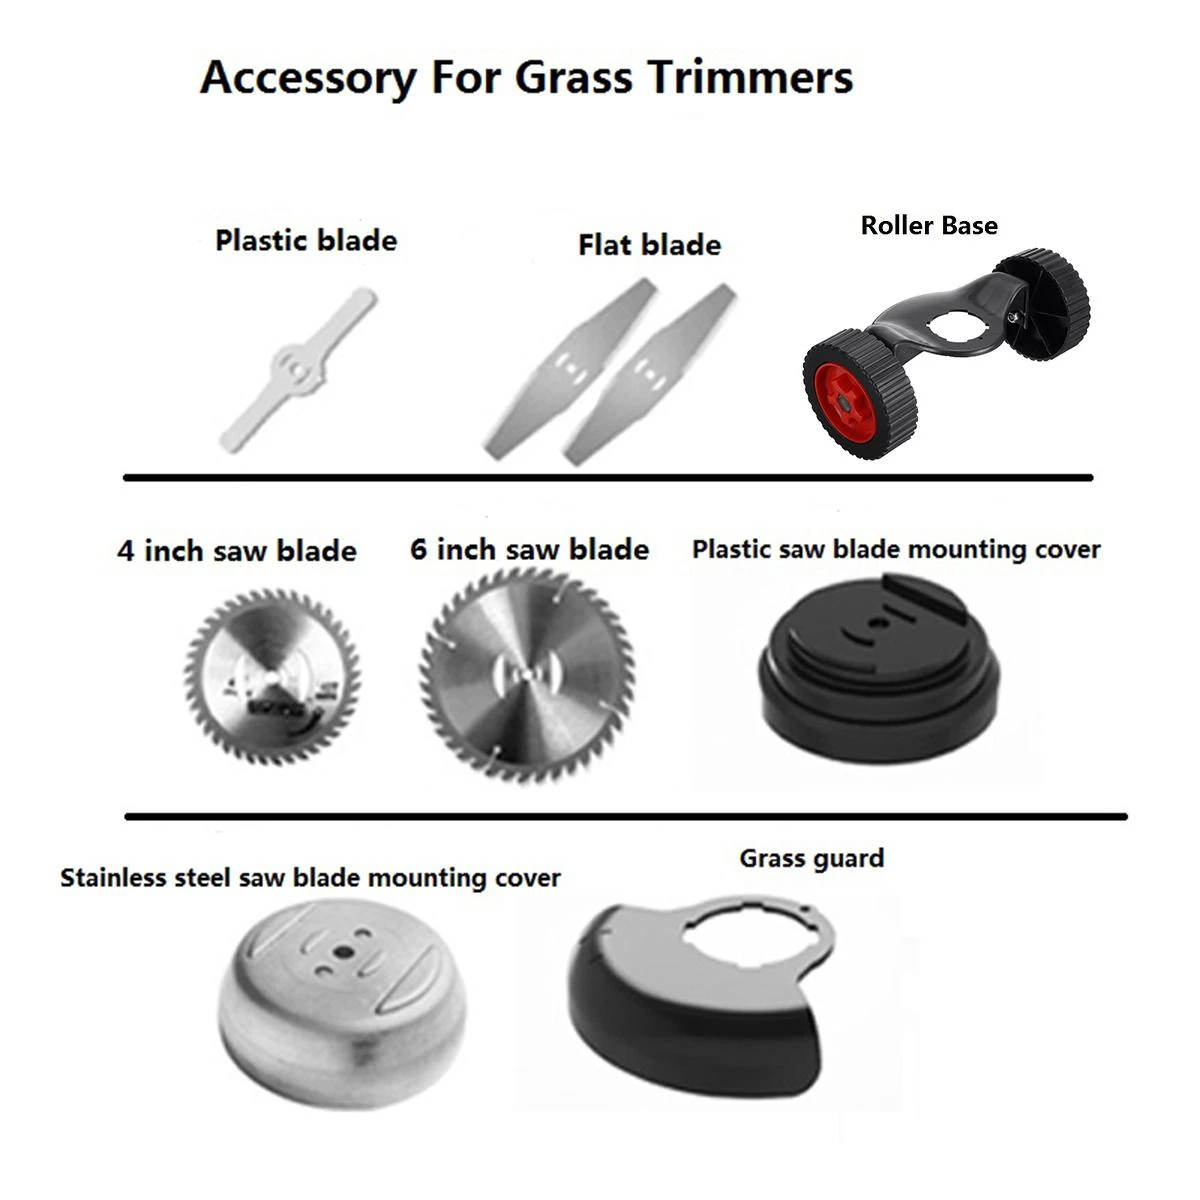 1pcs Accessory For Grass Trimmers Brush Cutter Lawn Mower Garden Power Tools Household Blade Adapter Attachment